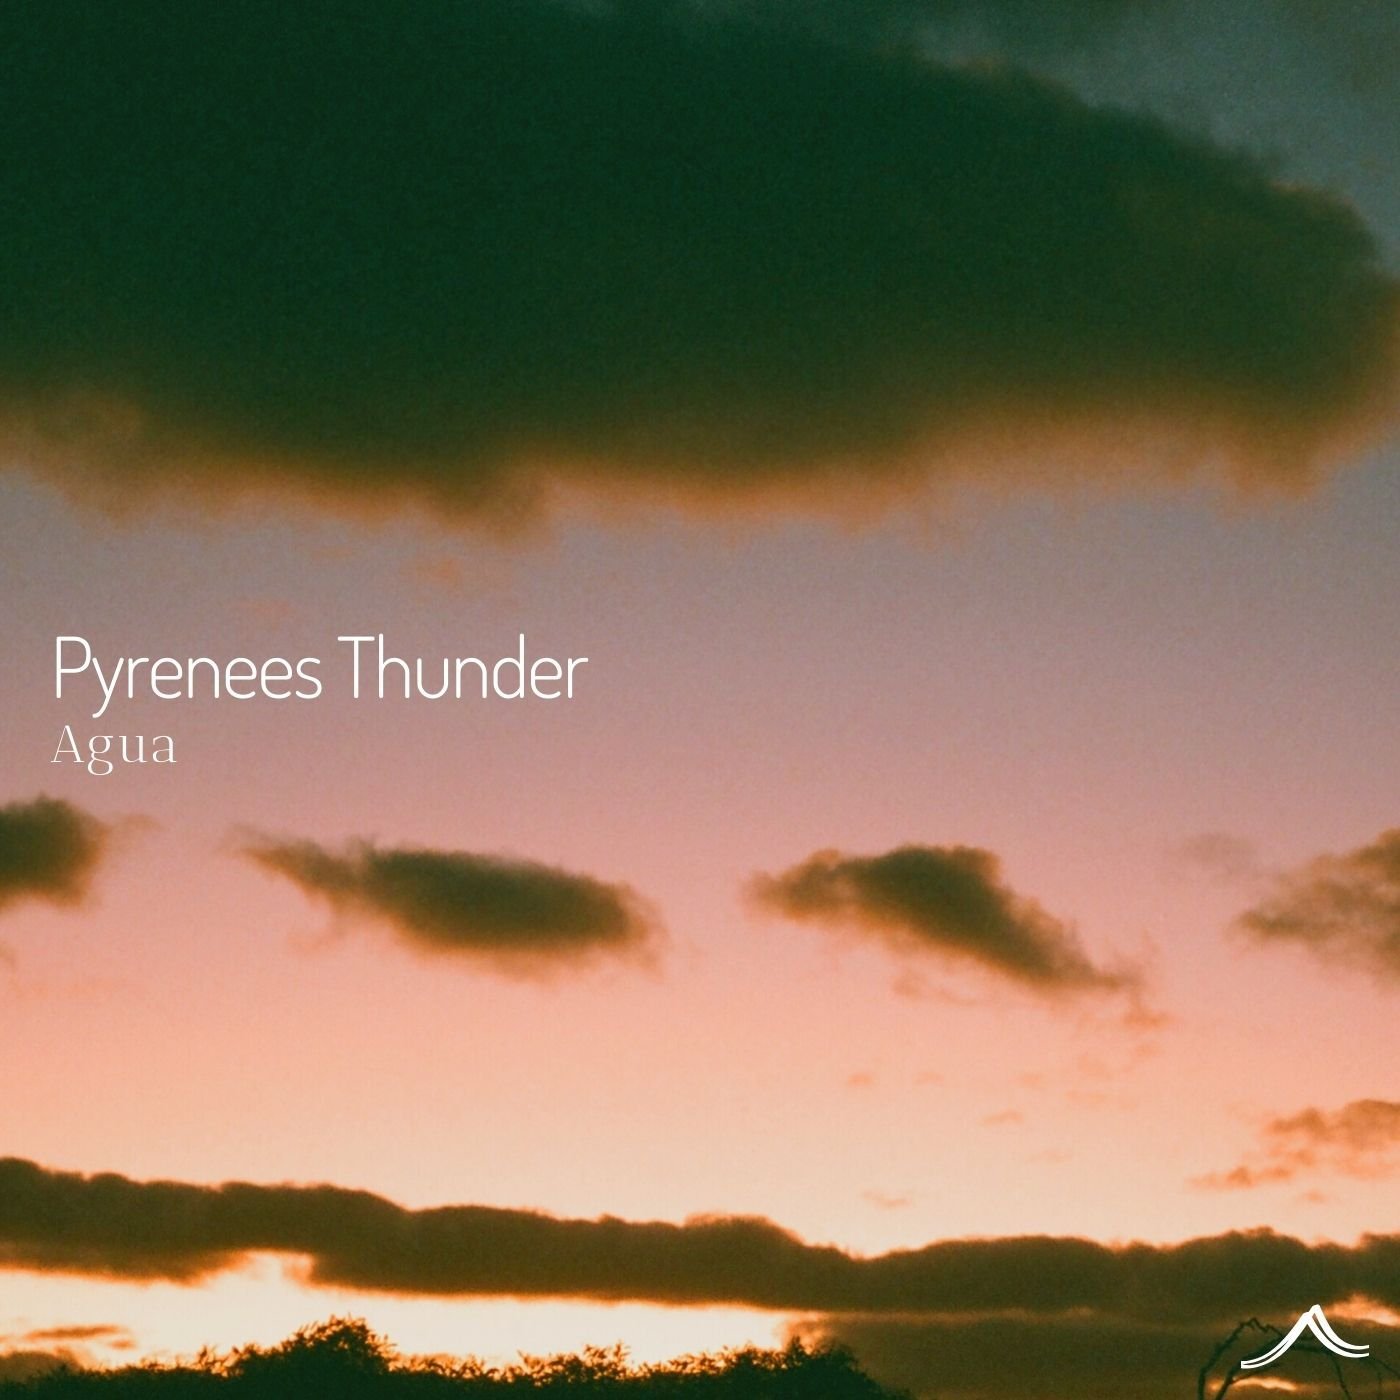 Back with another atmospheric field recording - my latest track 'Pyrenees Thunder' is now live on my Agua profile with Soothe Sounds label. 🎶 

Inspired by the majestic Pyrenees mountains, this captures the awe-inspiring symphony where birds interru